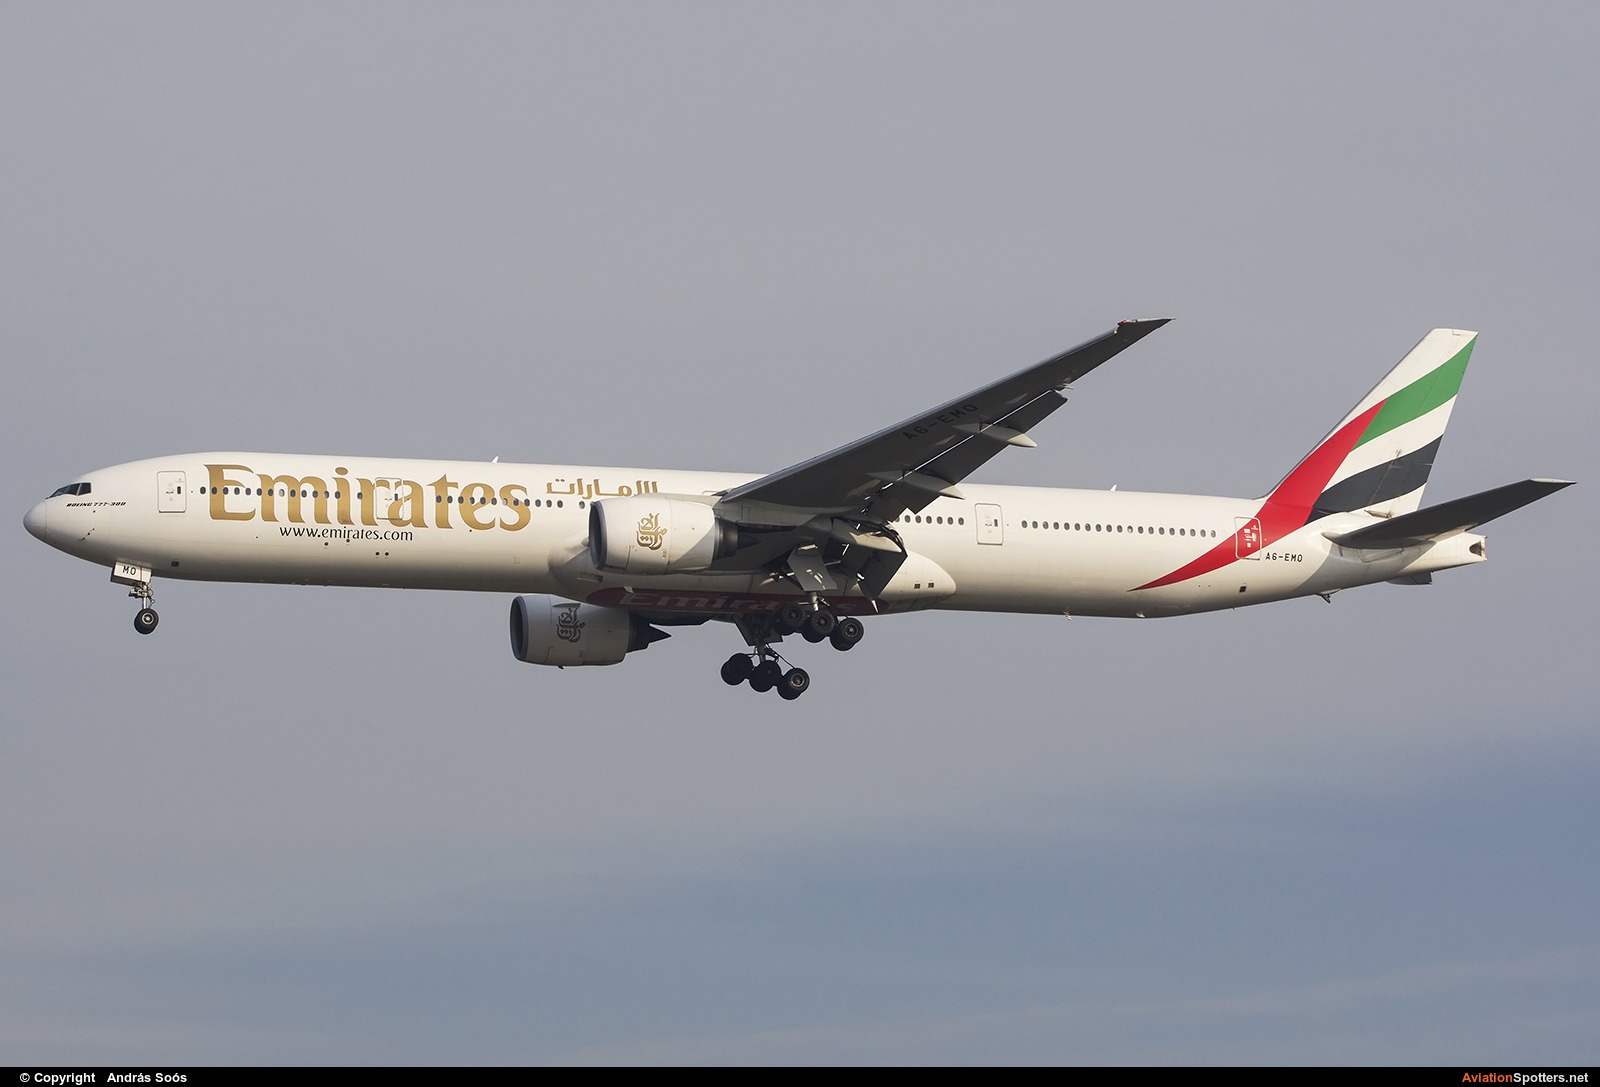 Emirates Airlines  -  777-300  (A6-EMO) By András Soós (sas1965)